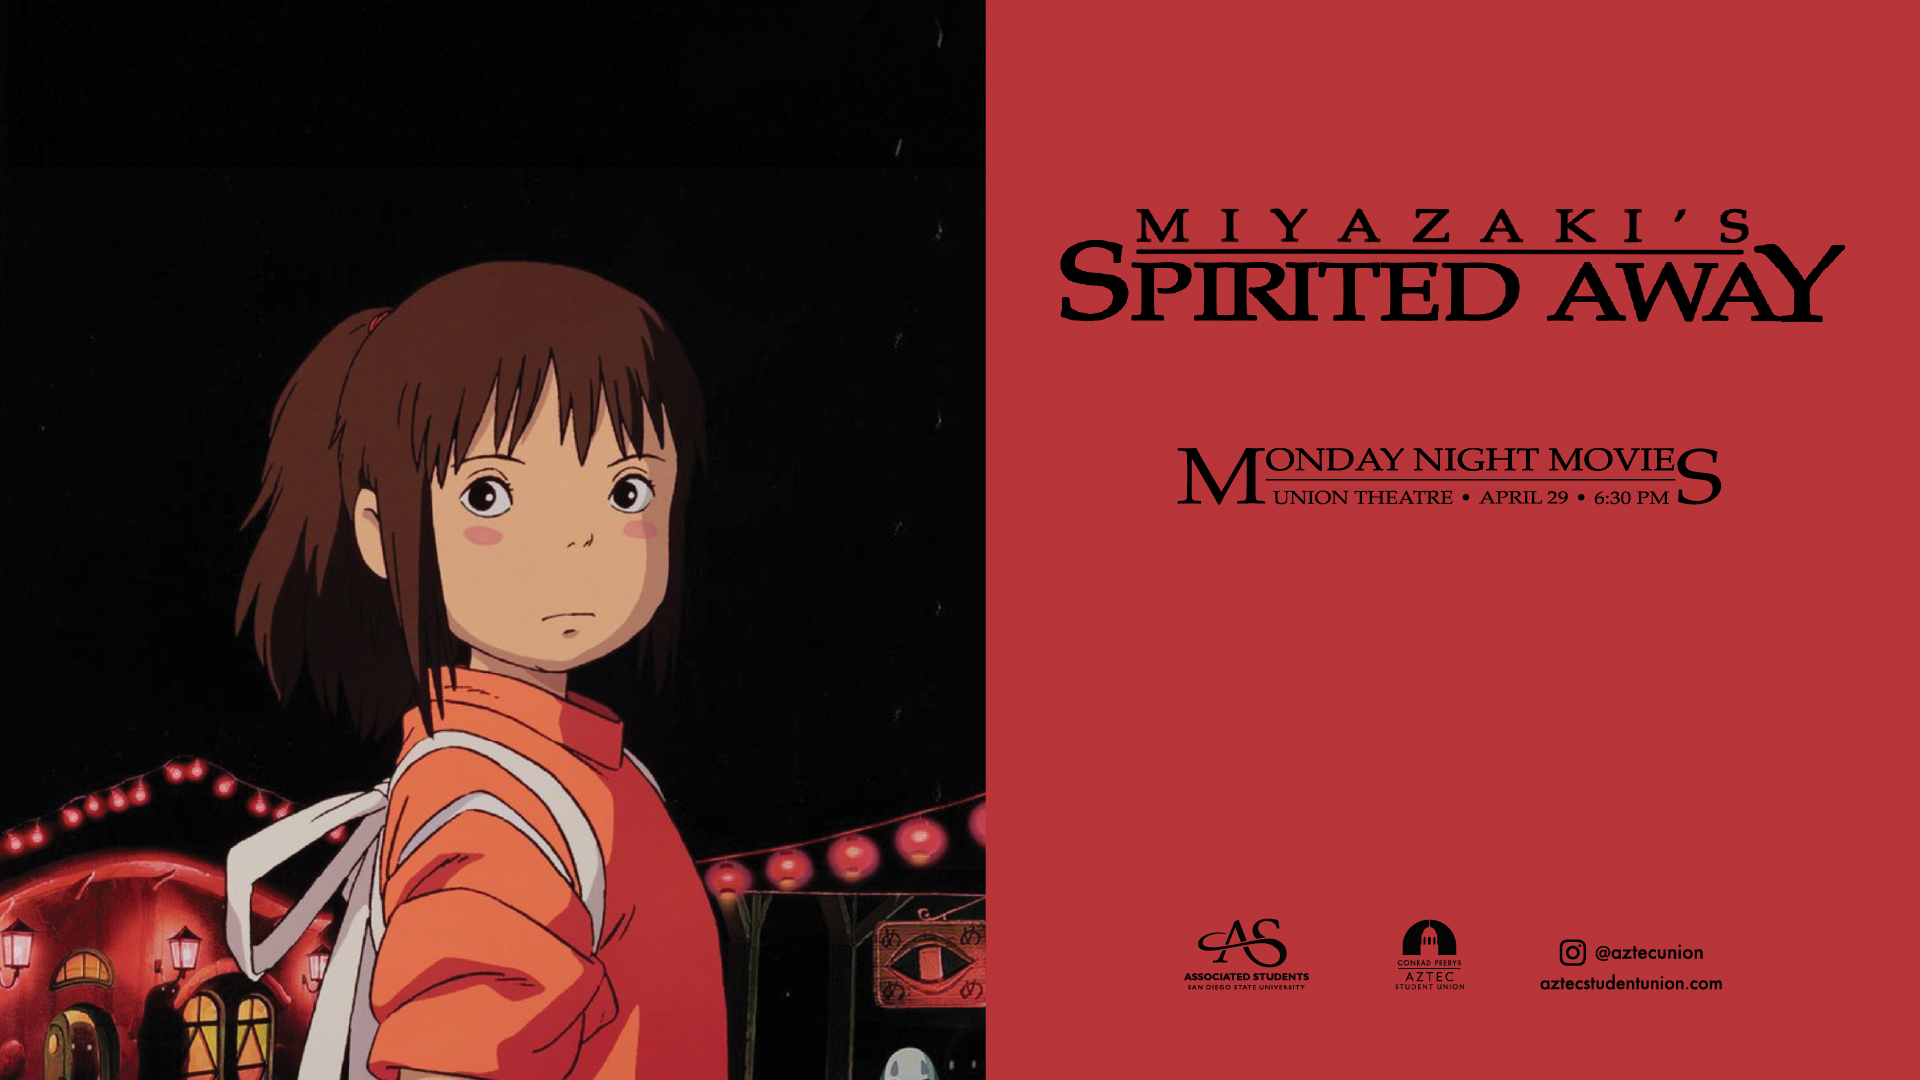 Black background with girl from movie Spirited Away. Red background on the rightside with black text saying "Miyazaki's Spirited Away" and event details.